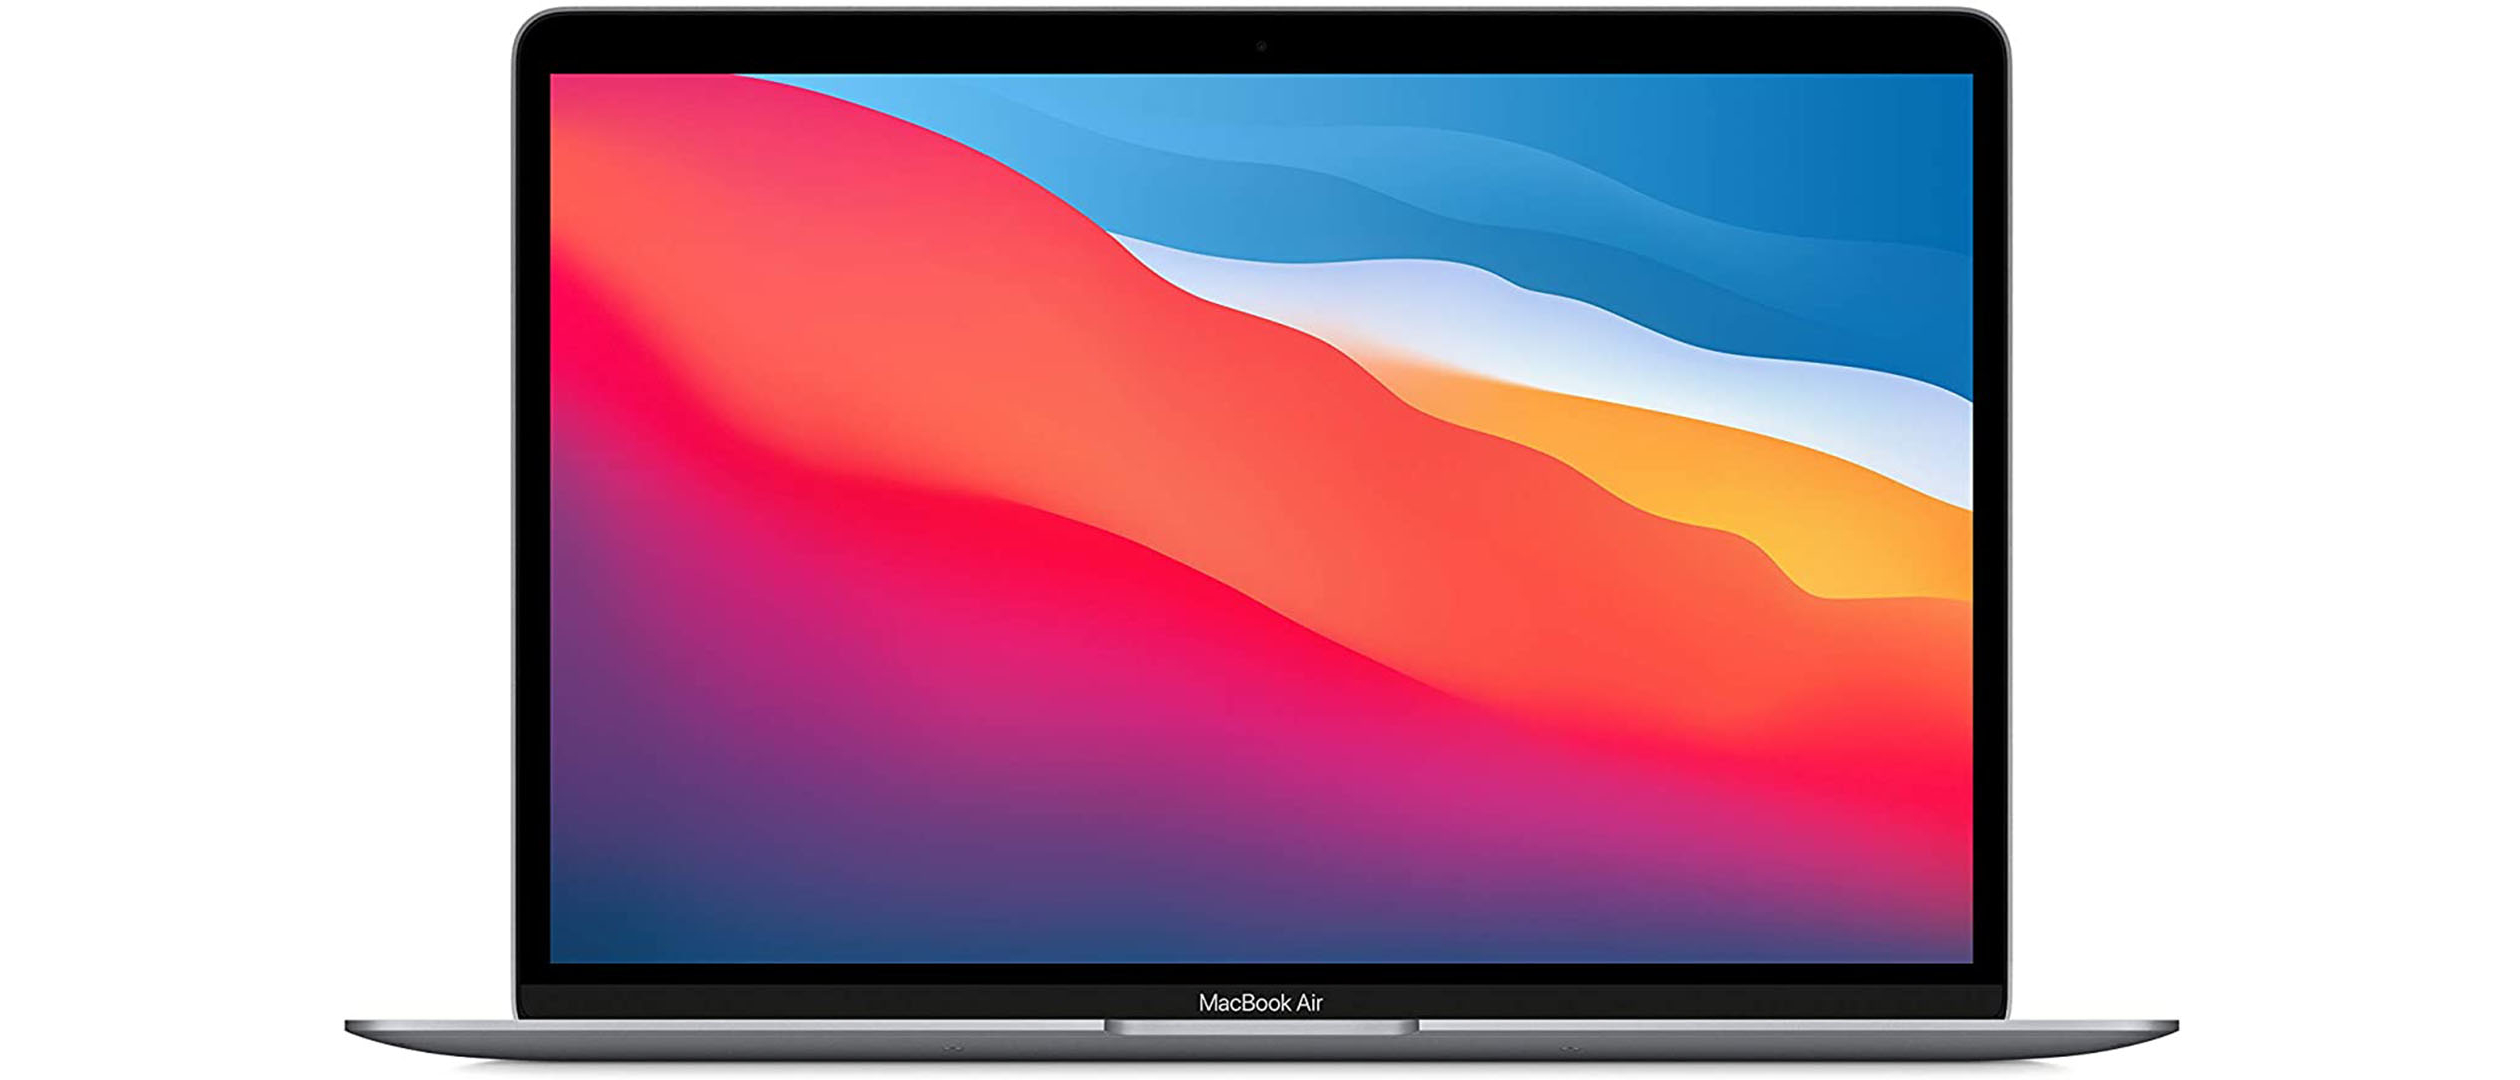  Save $250 on this amazing student MacBook, down to just $750 